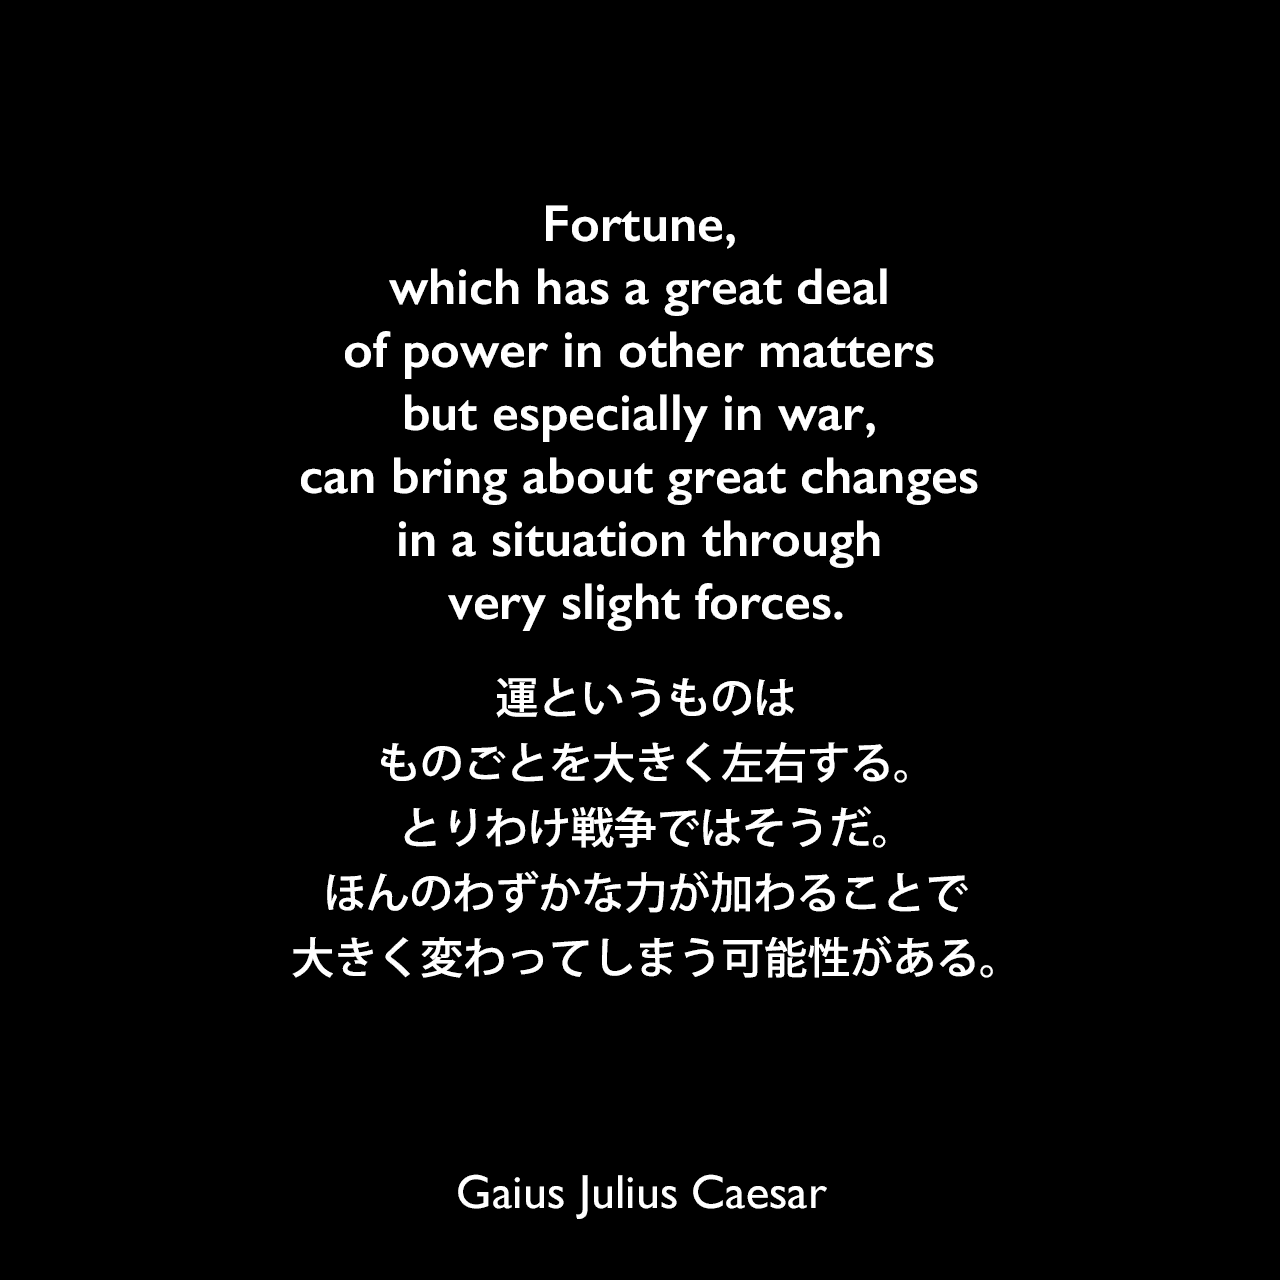 Fortune, which has a great deal of power in other matters but especially in war, can bring about great changes in a situation through very slight forces.運というものは、ものごとを大きく左右する。とりわけ戦争ではそうだ。ほんのわずかな力が加わることで、大きく変わってしまう可能性がある。Gaius Julius Caesar